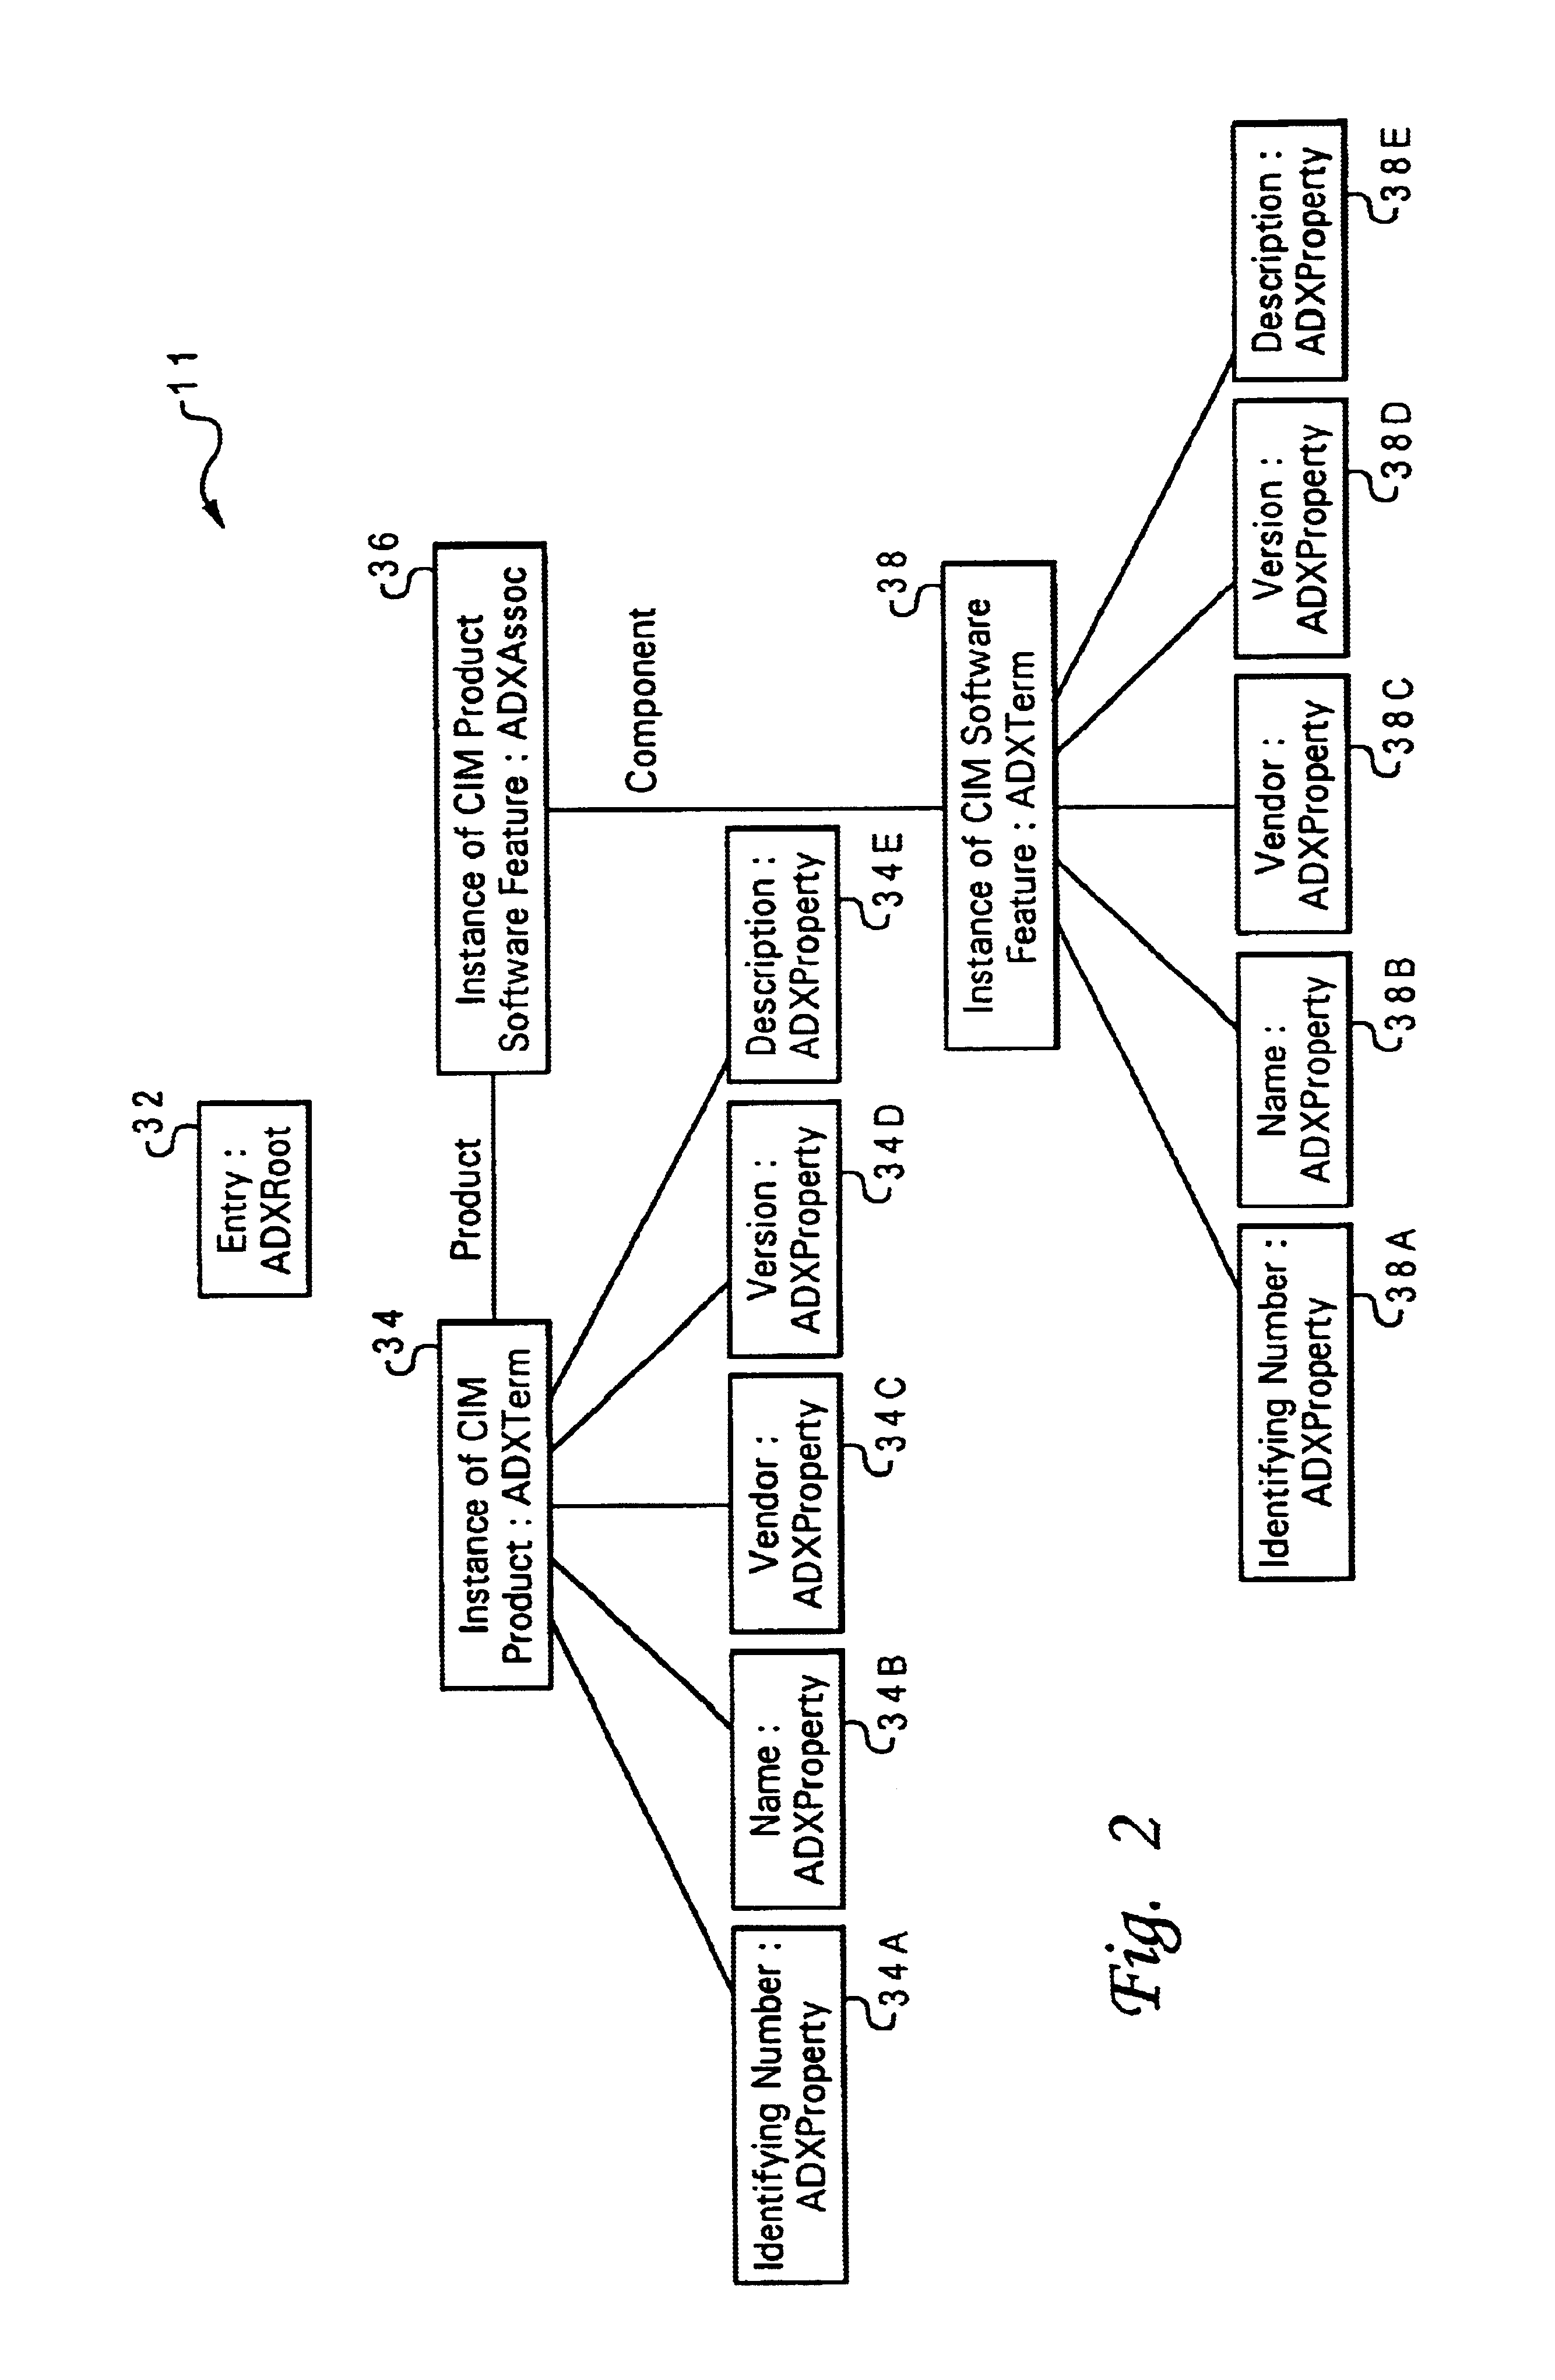 Combination associative and directed graph representation of command structures